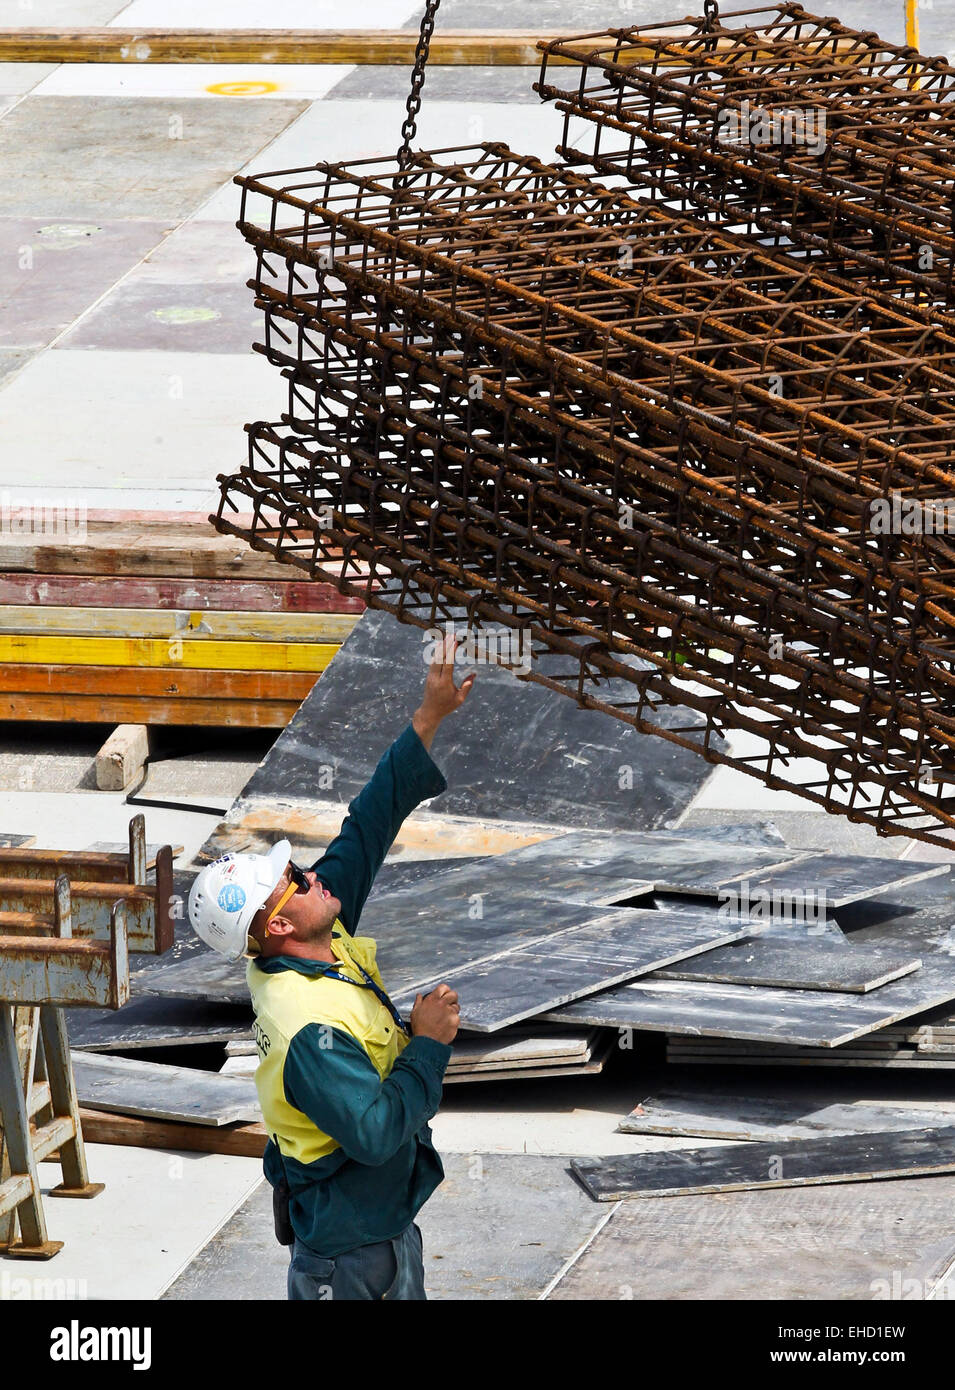 (150312) -- SYDNEY, March 12, 2015 (Xinhua) -- A man works at a construction site in Sydney, Australia, March 12, 2015. Australian unemployment has dropped lower to 6.3 percent in February with more than 15,600 new jobs added to the economy, the Australian Bureau of Statistics (ABS) announced on Thursday. (Xinhua/Jin Linpeng) Stock Photo